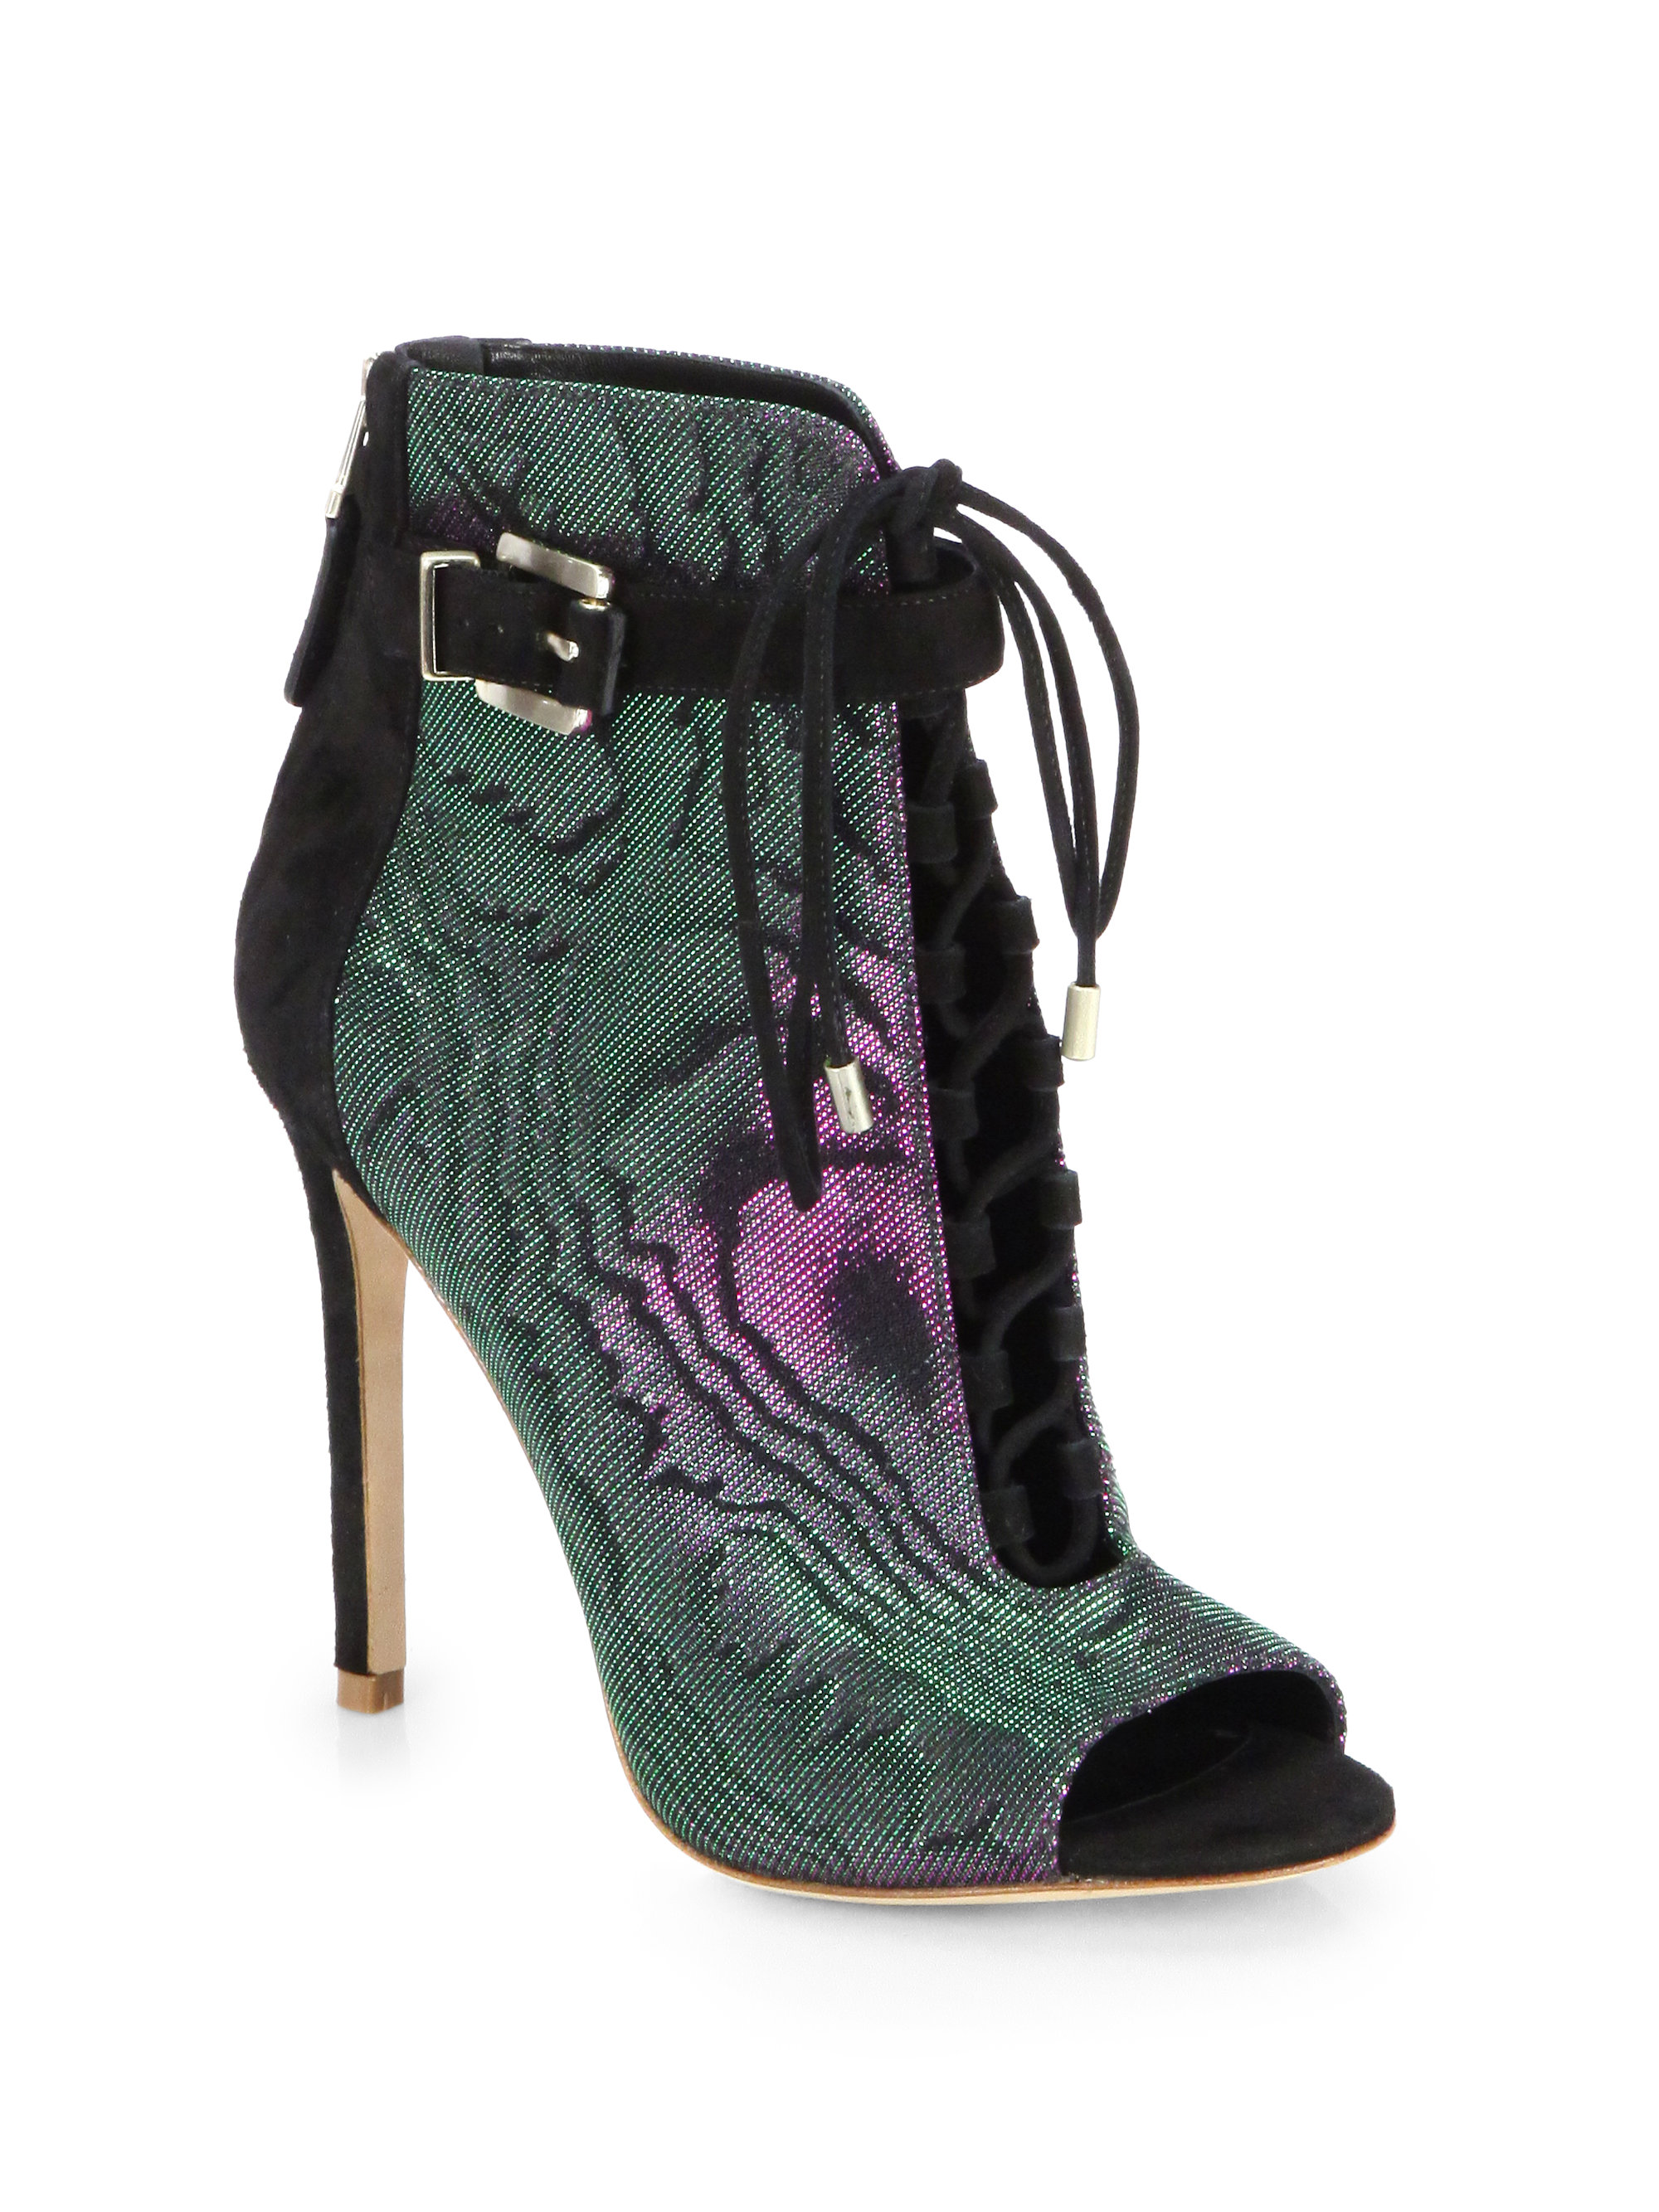 B Brian Atwood Lindford Iridescent Canvas Suede Peeptoe Ankle Boots in ...